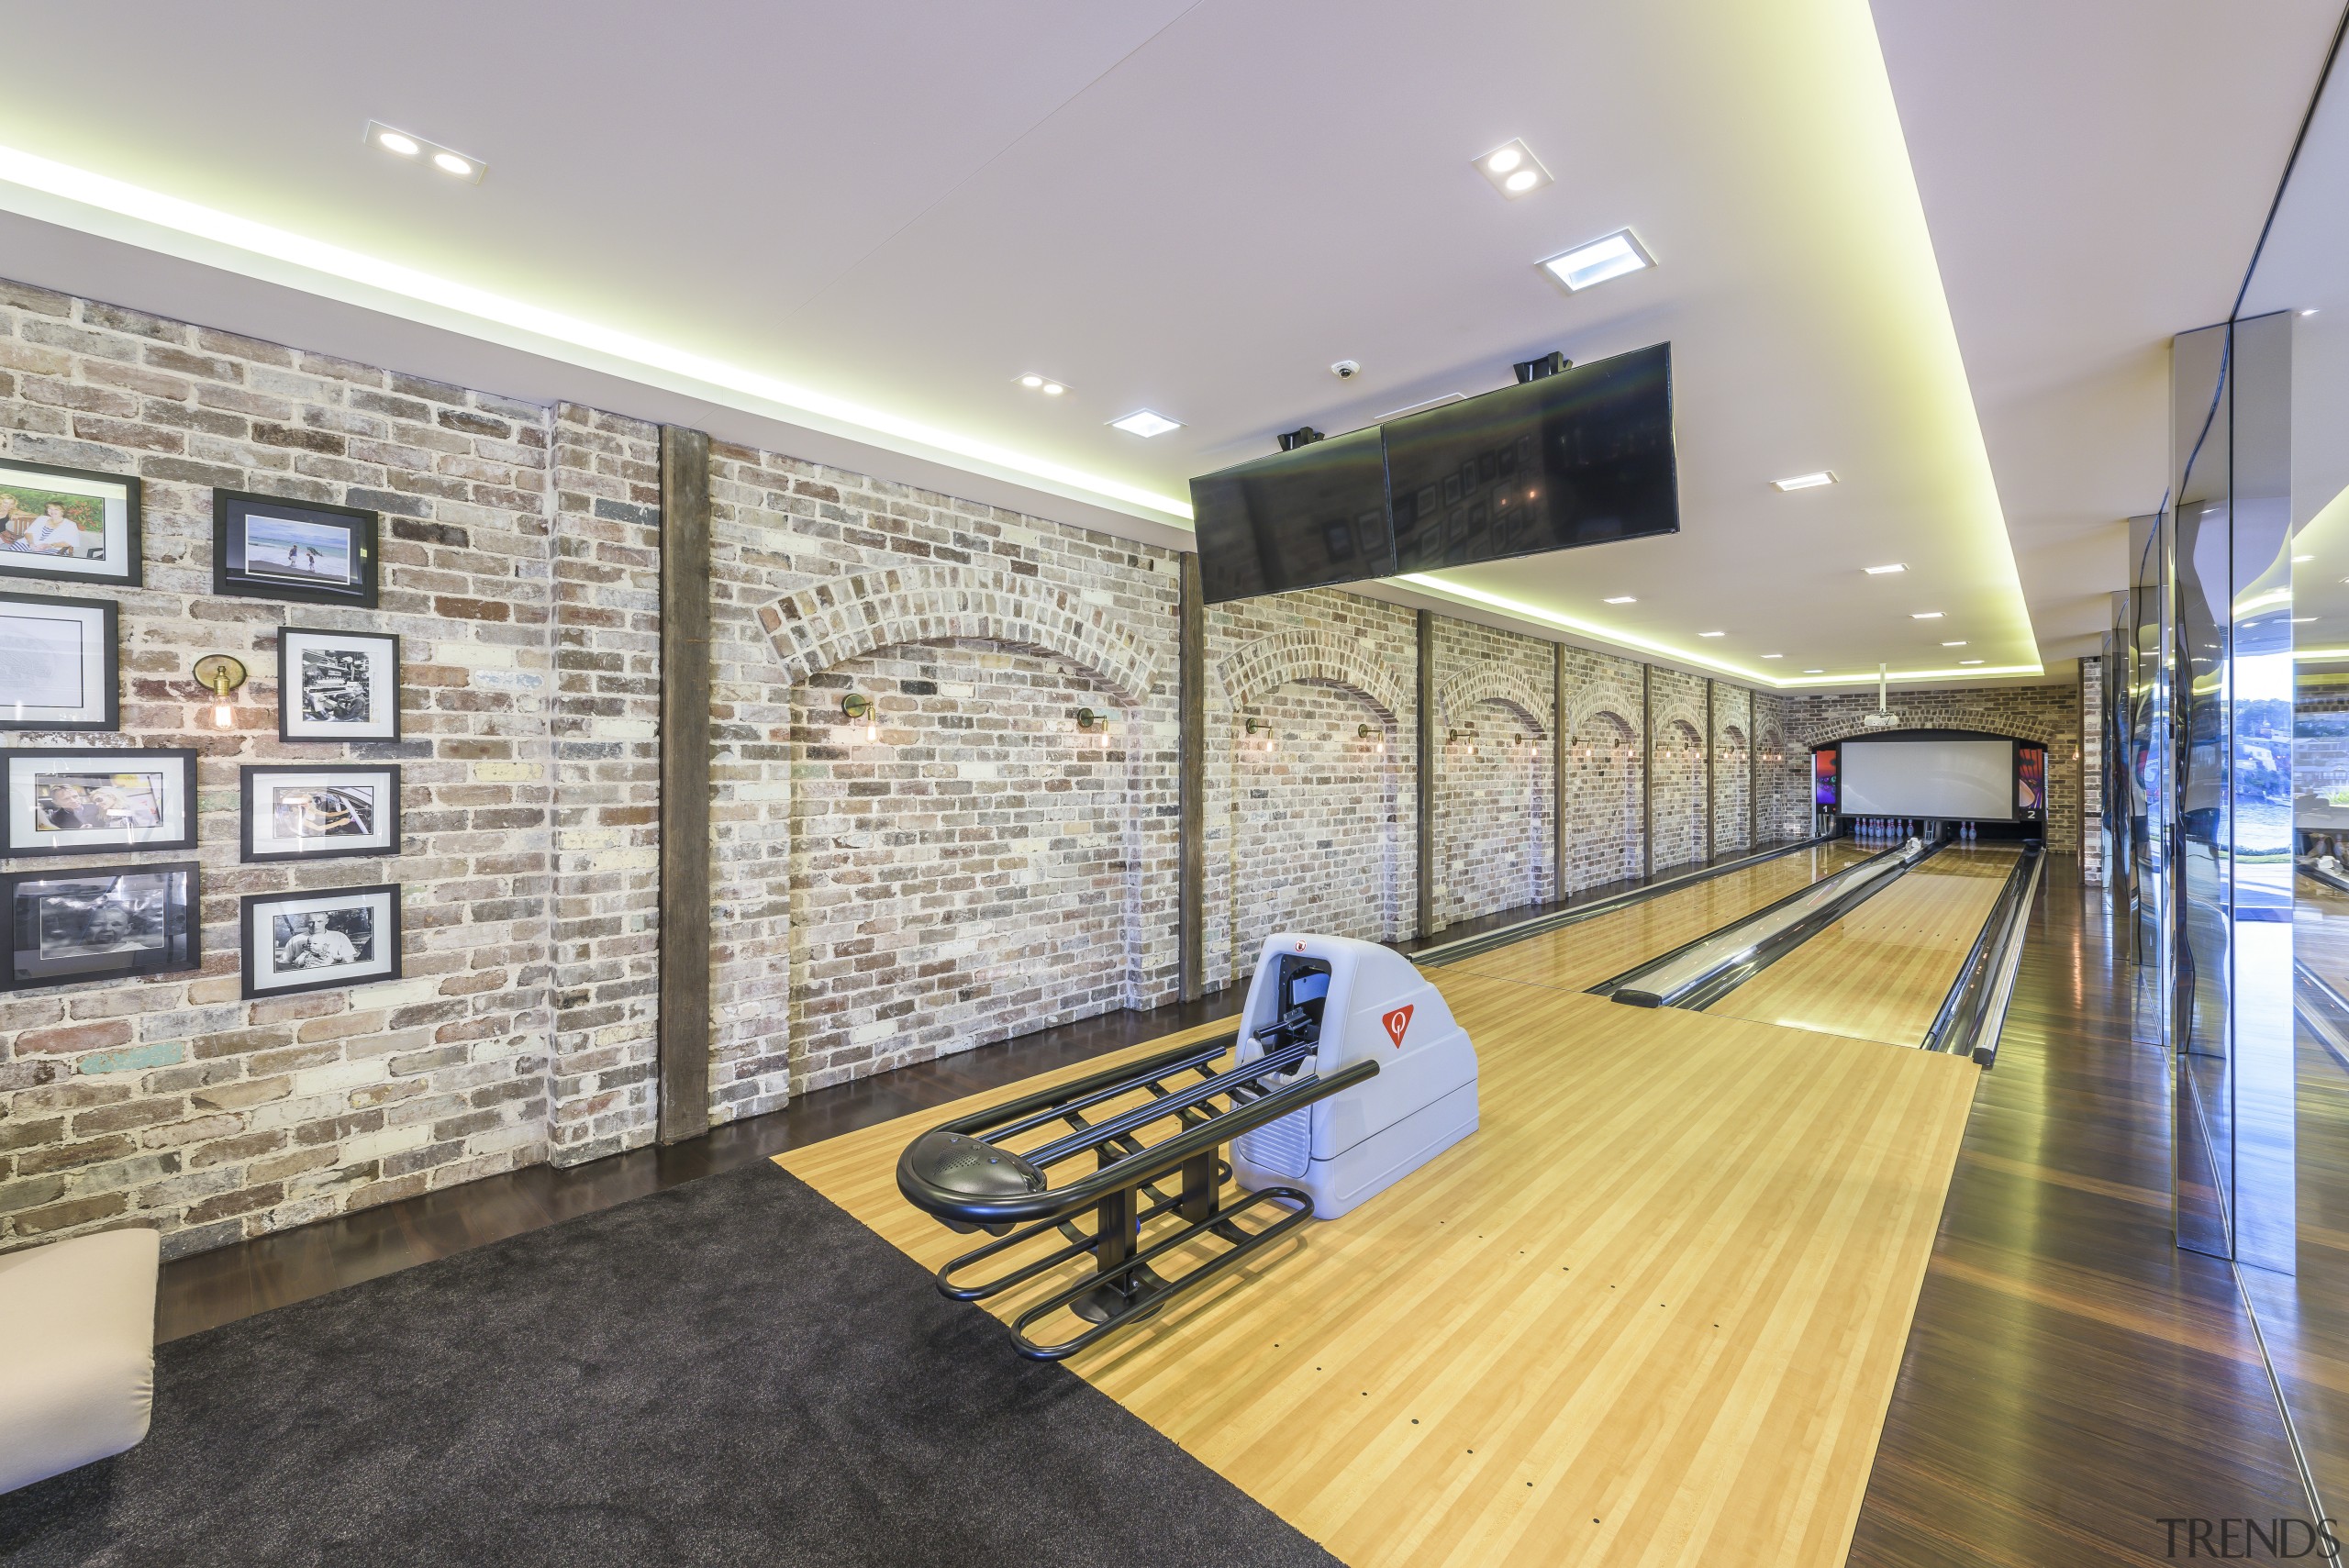 A full-size bowling alley is just one of ceiling, floor, flooring, interior design, leisure centre, lobby, real estate, gray